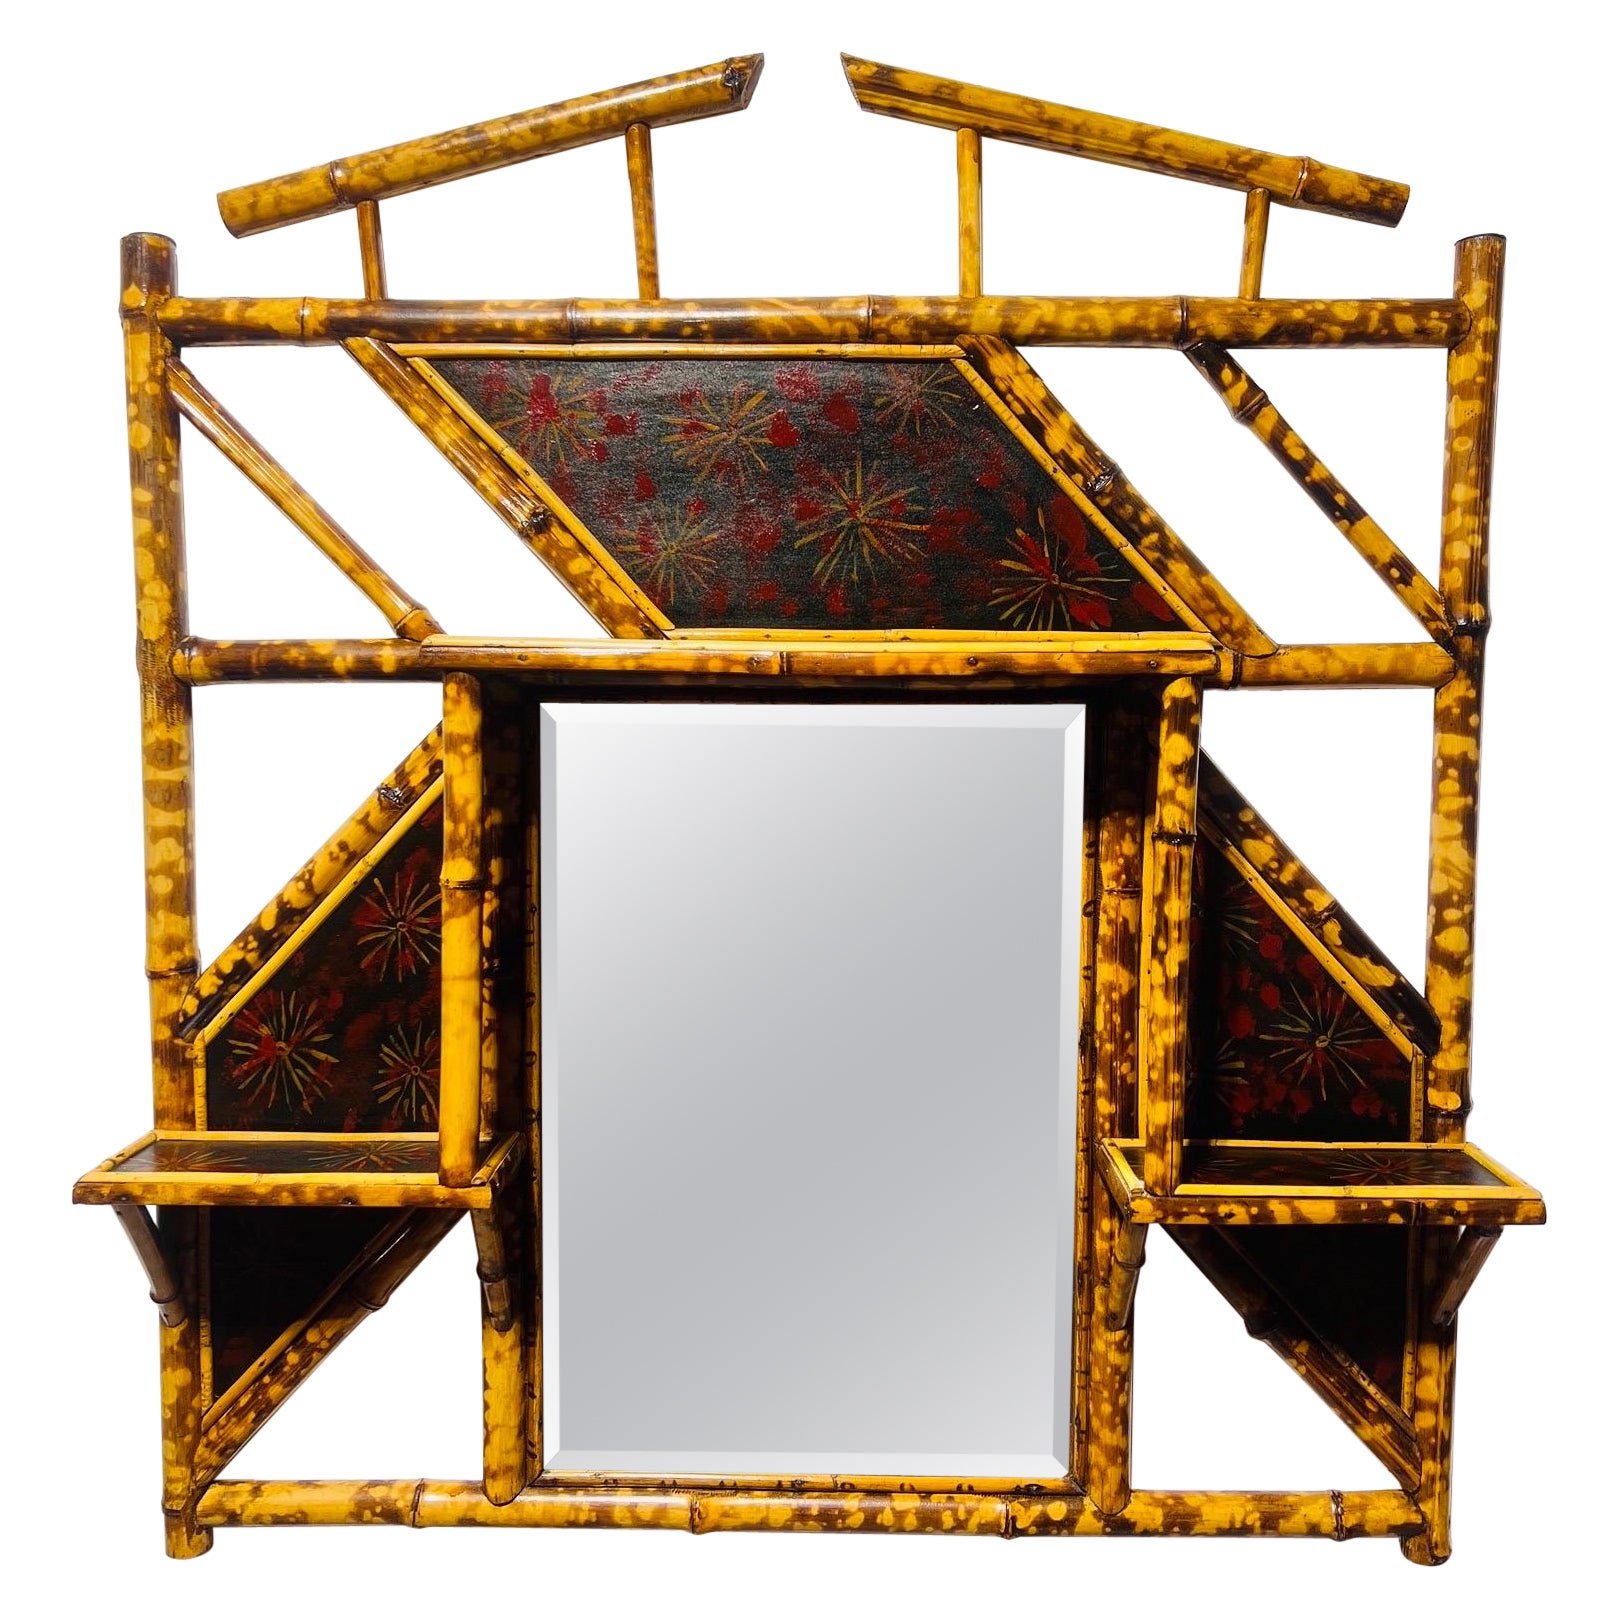 19th Century English Aesthetic Movement Lacquered Bamboo Wall Mirror / Shelf For Sale